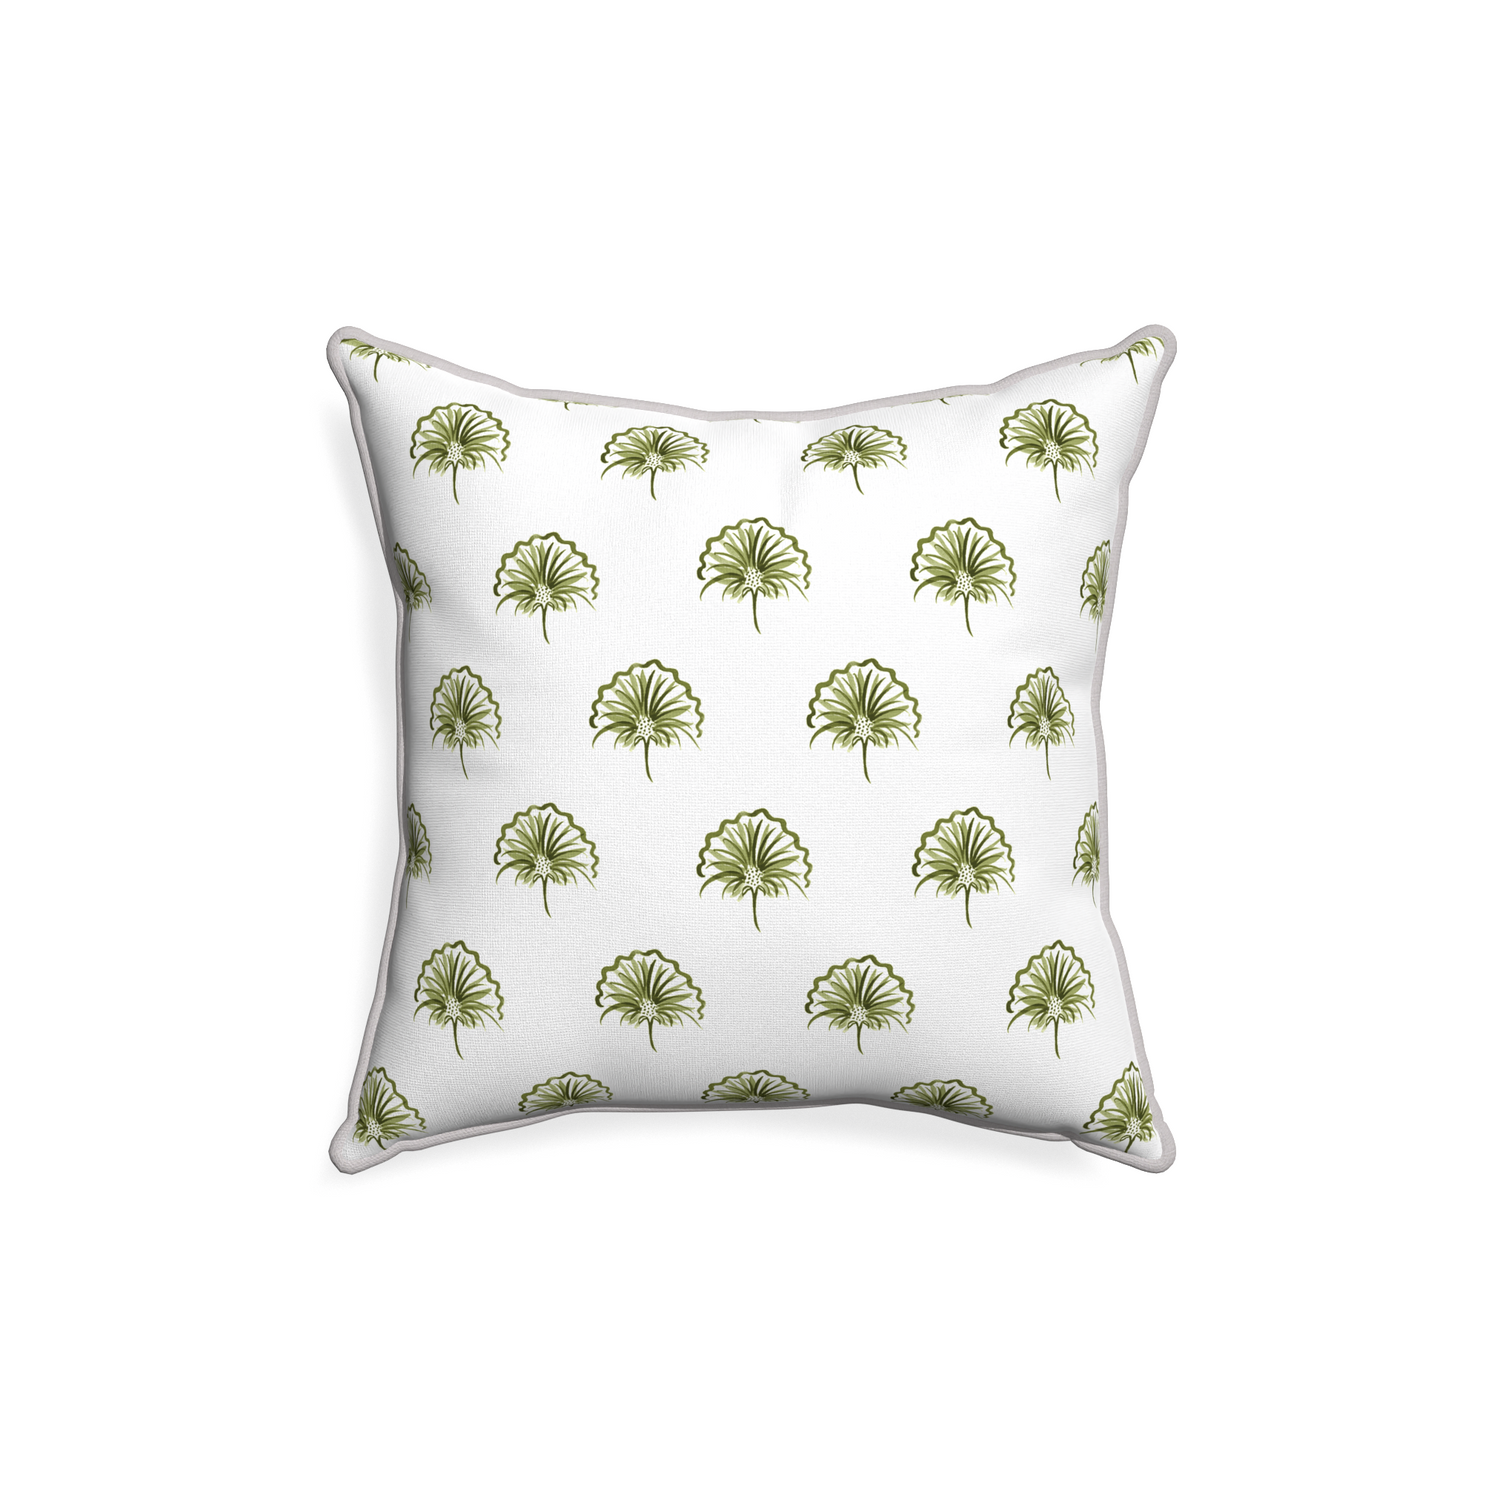 18-square penelope moss custom green floralpillow with pebble piping on white background